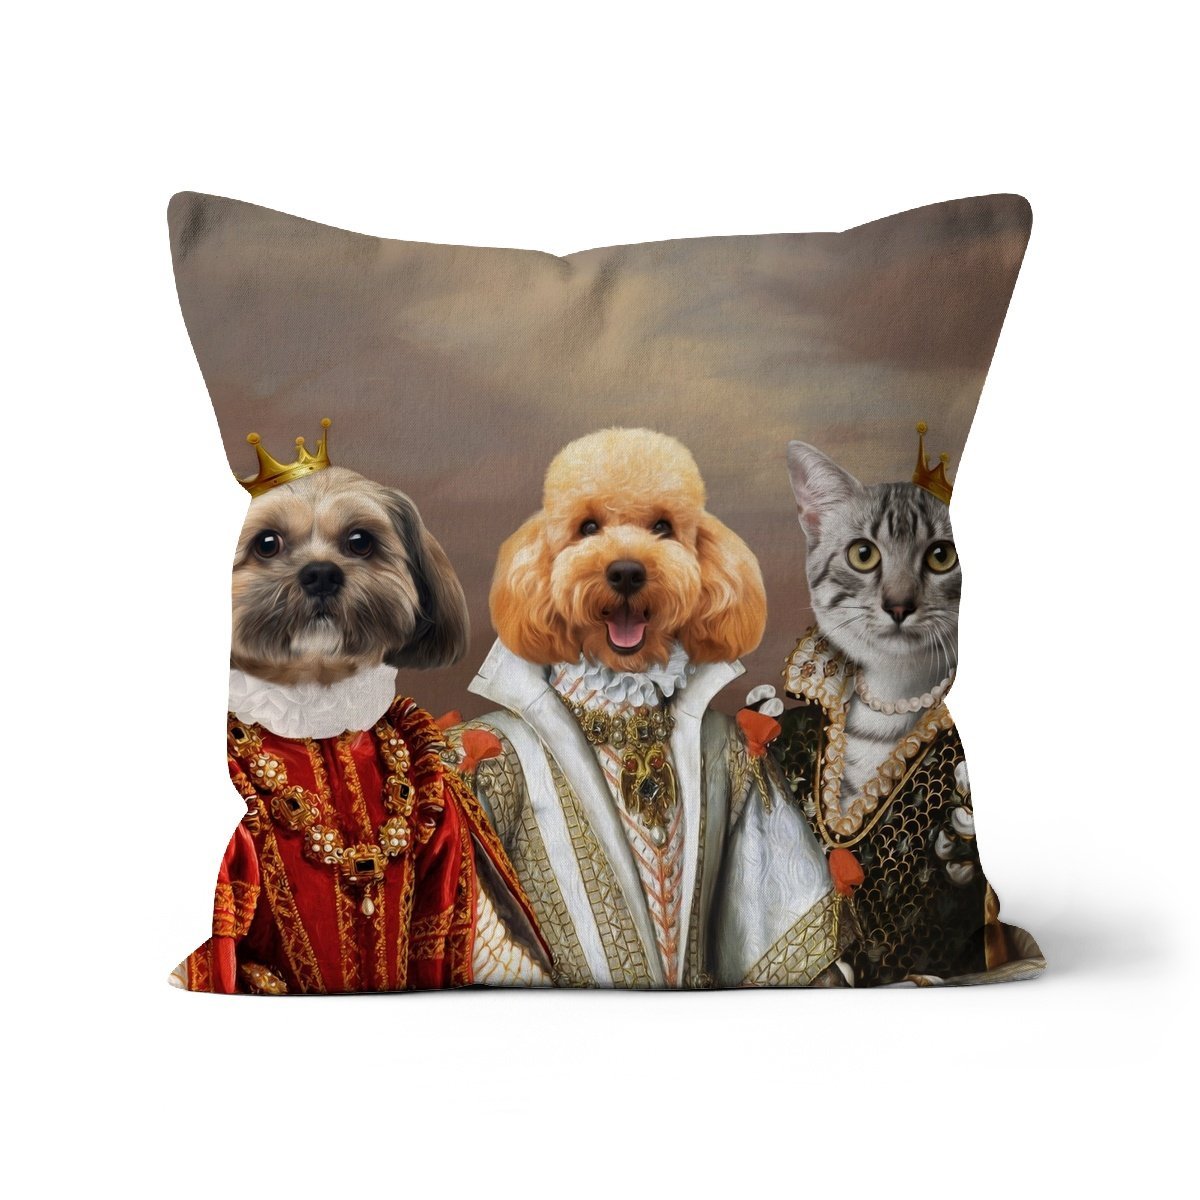 The Queens: Custom Pet Cushion - Paw & Glory - #pet portraits# - #dog portraits# - #pet portraits uk#paw and glory, custom pet portrait cushion,print pet on pillow, custom cat pillows, pet face pillow, pet print pillow, dog on pillow